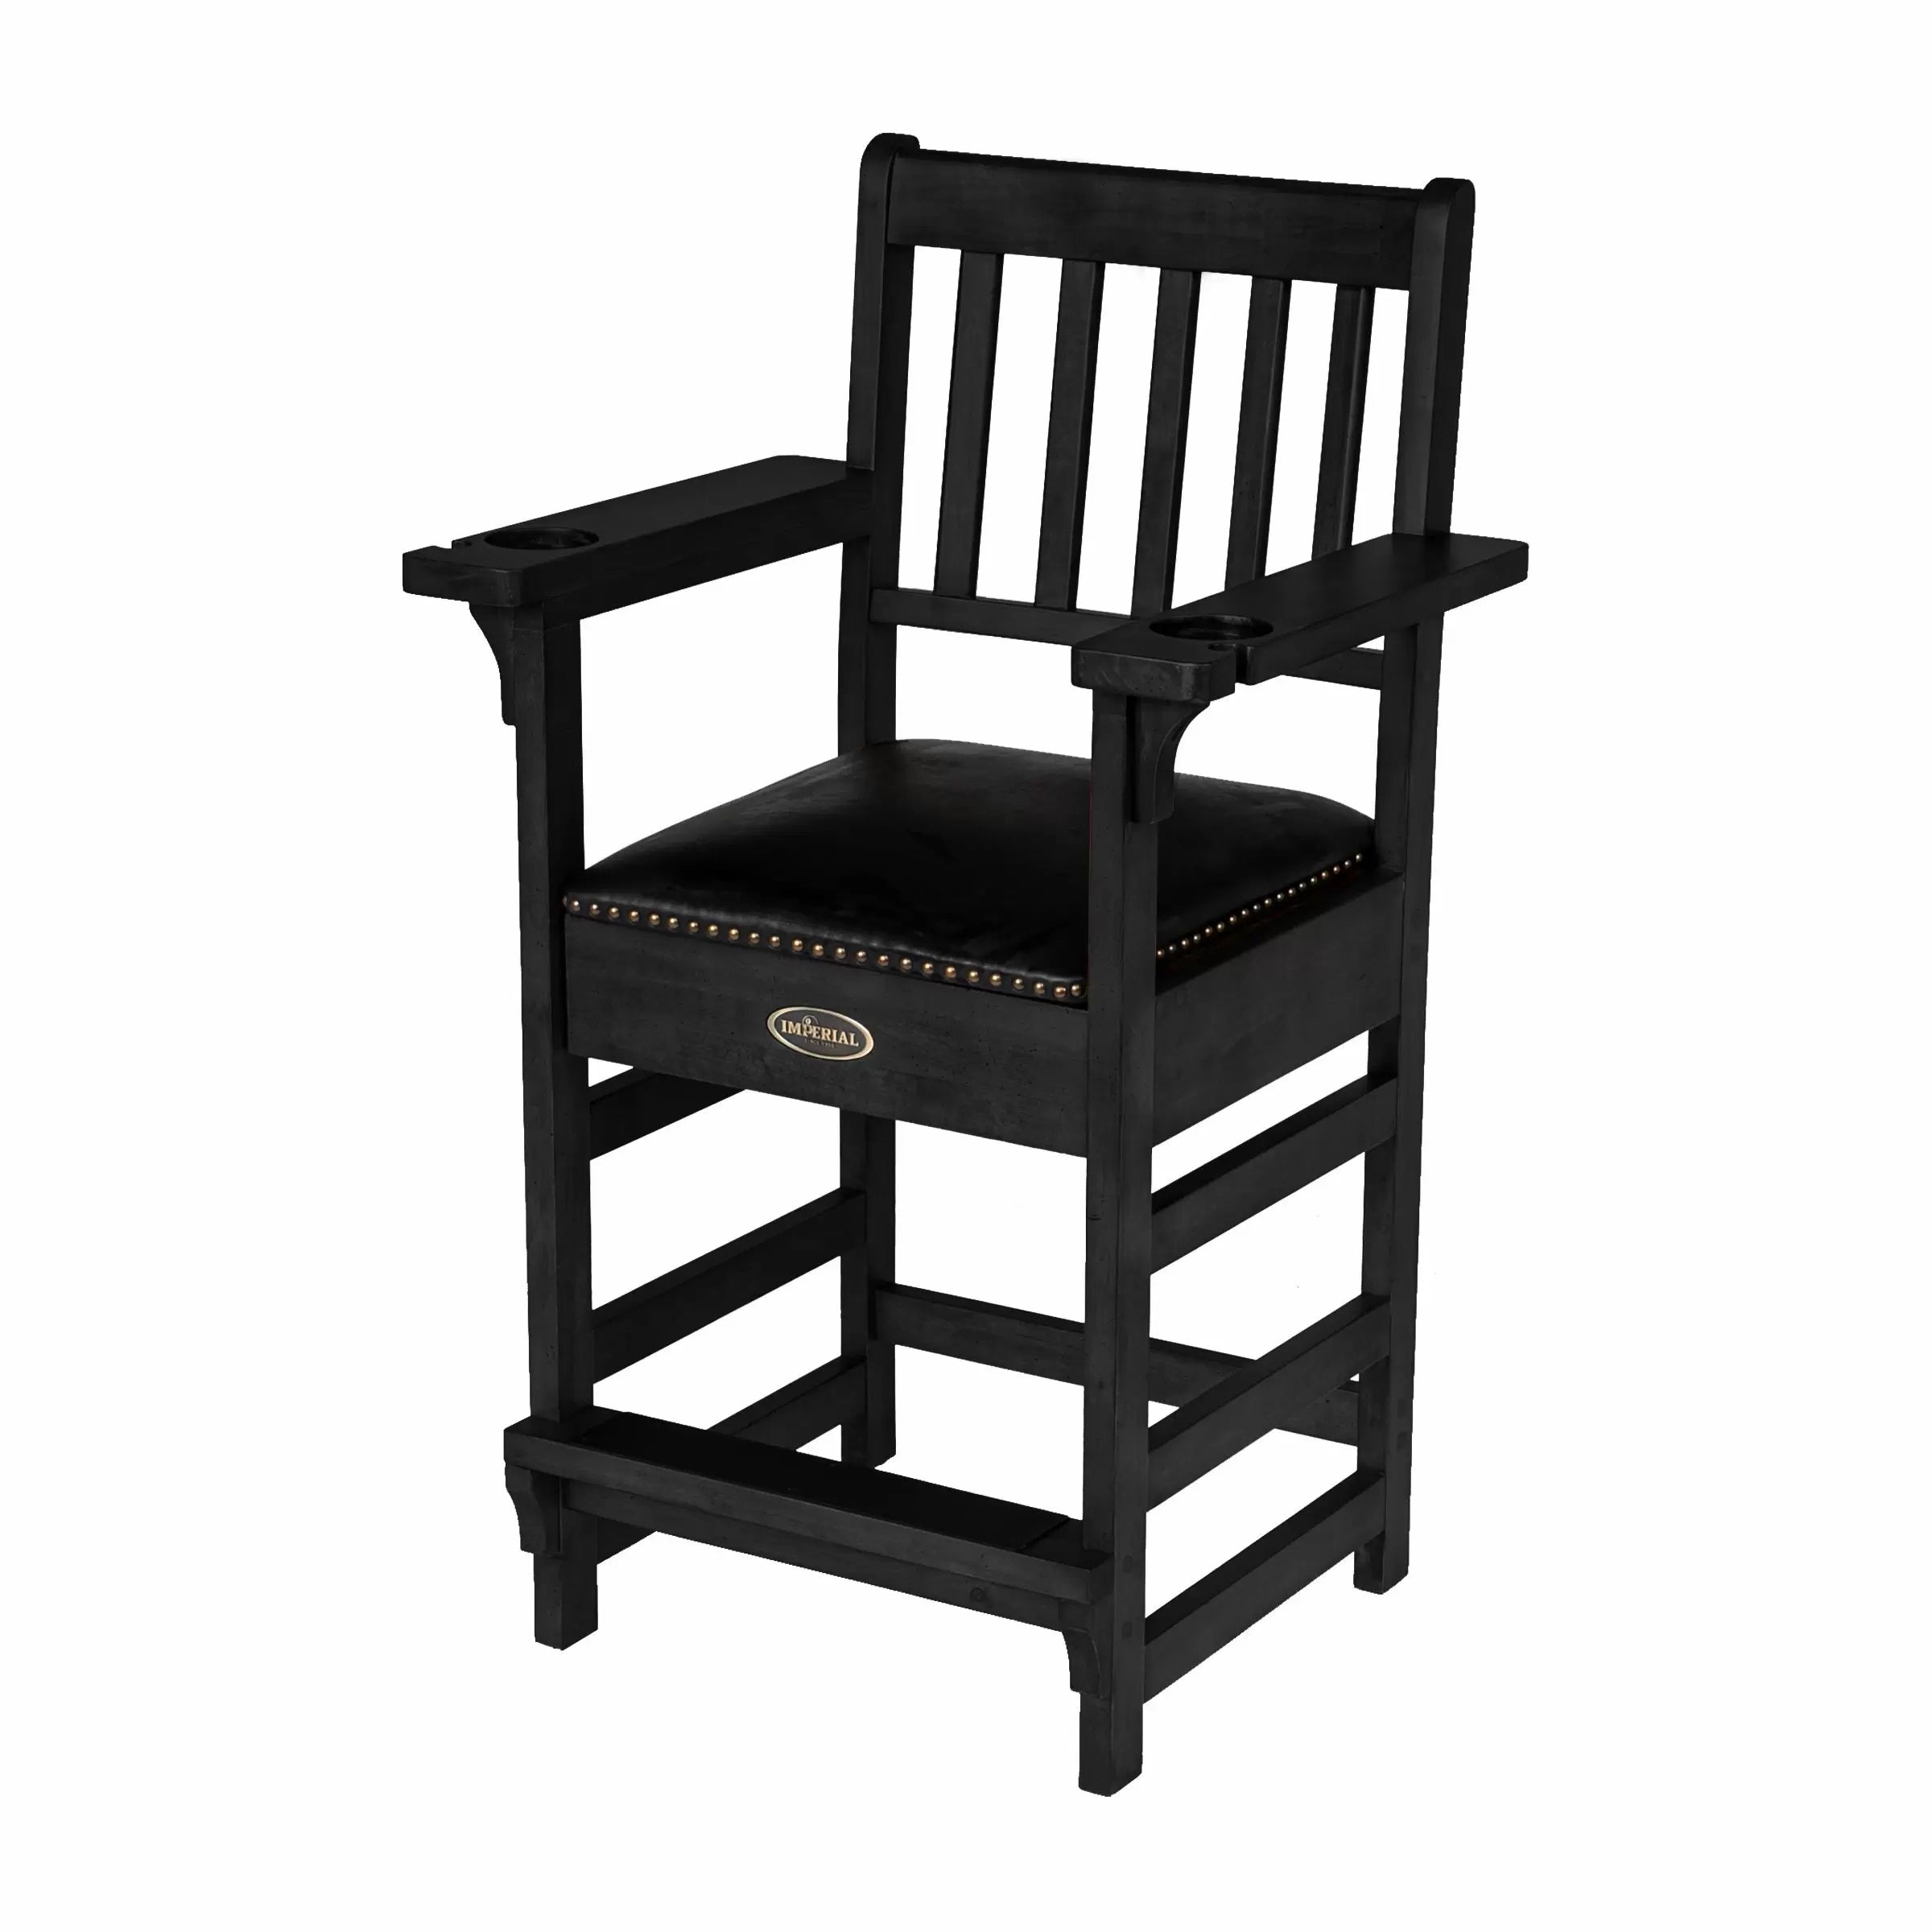 Imperial USA Premium Spectator Chair with Drawer Black Left Angle